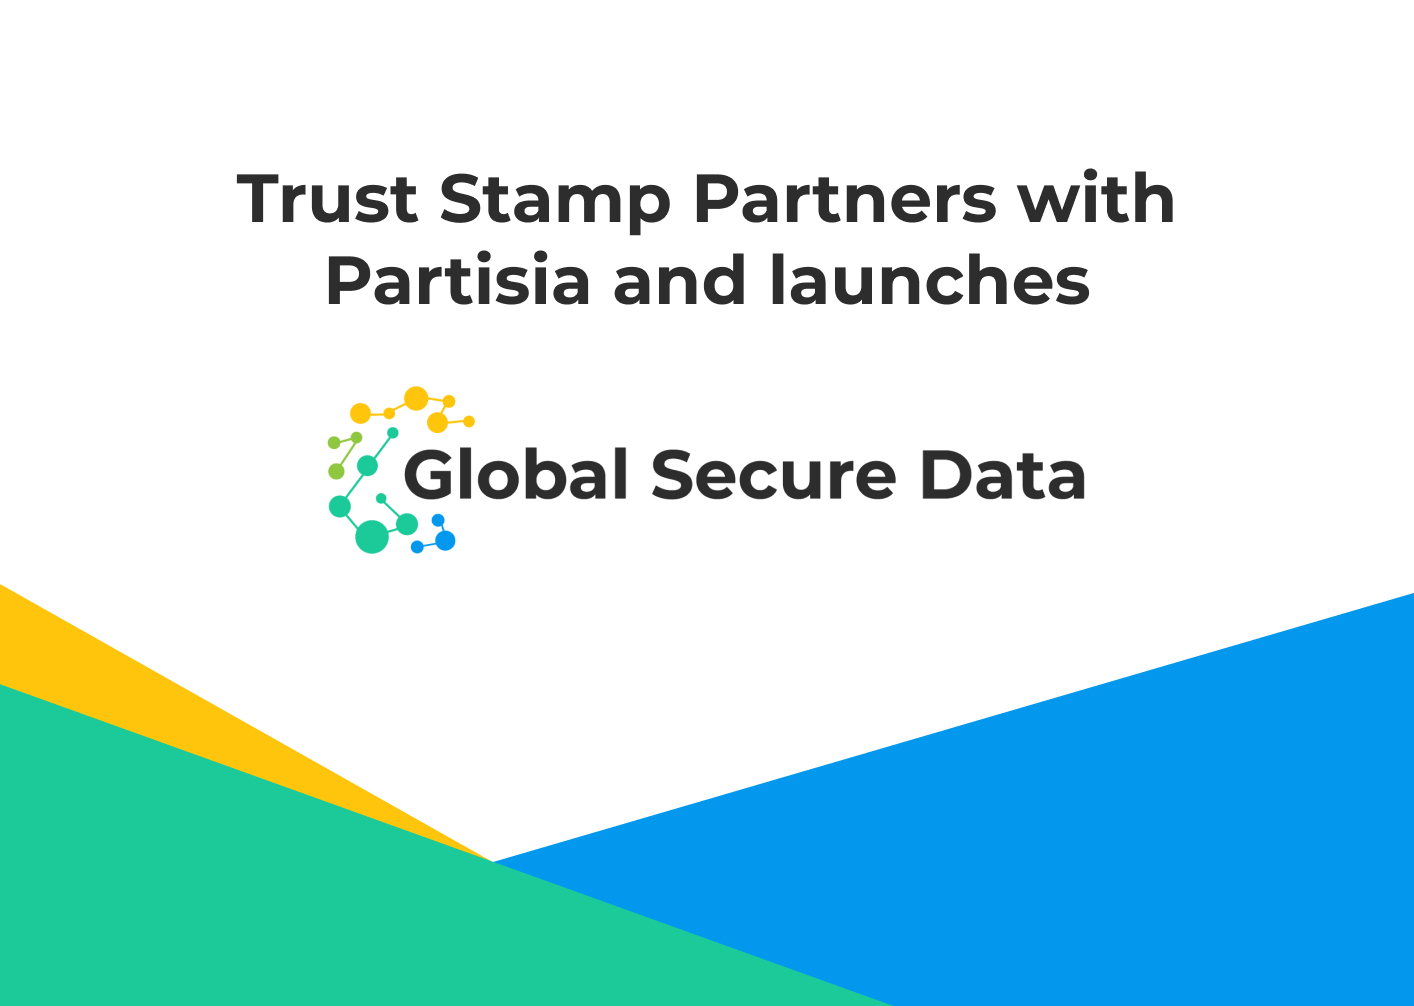 truststamp-partners-with-partisia